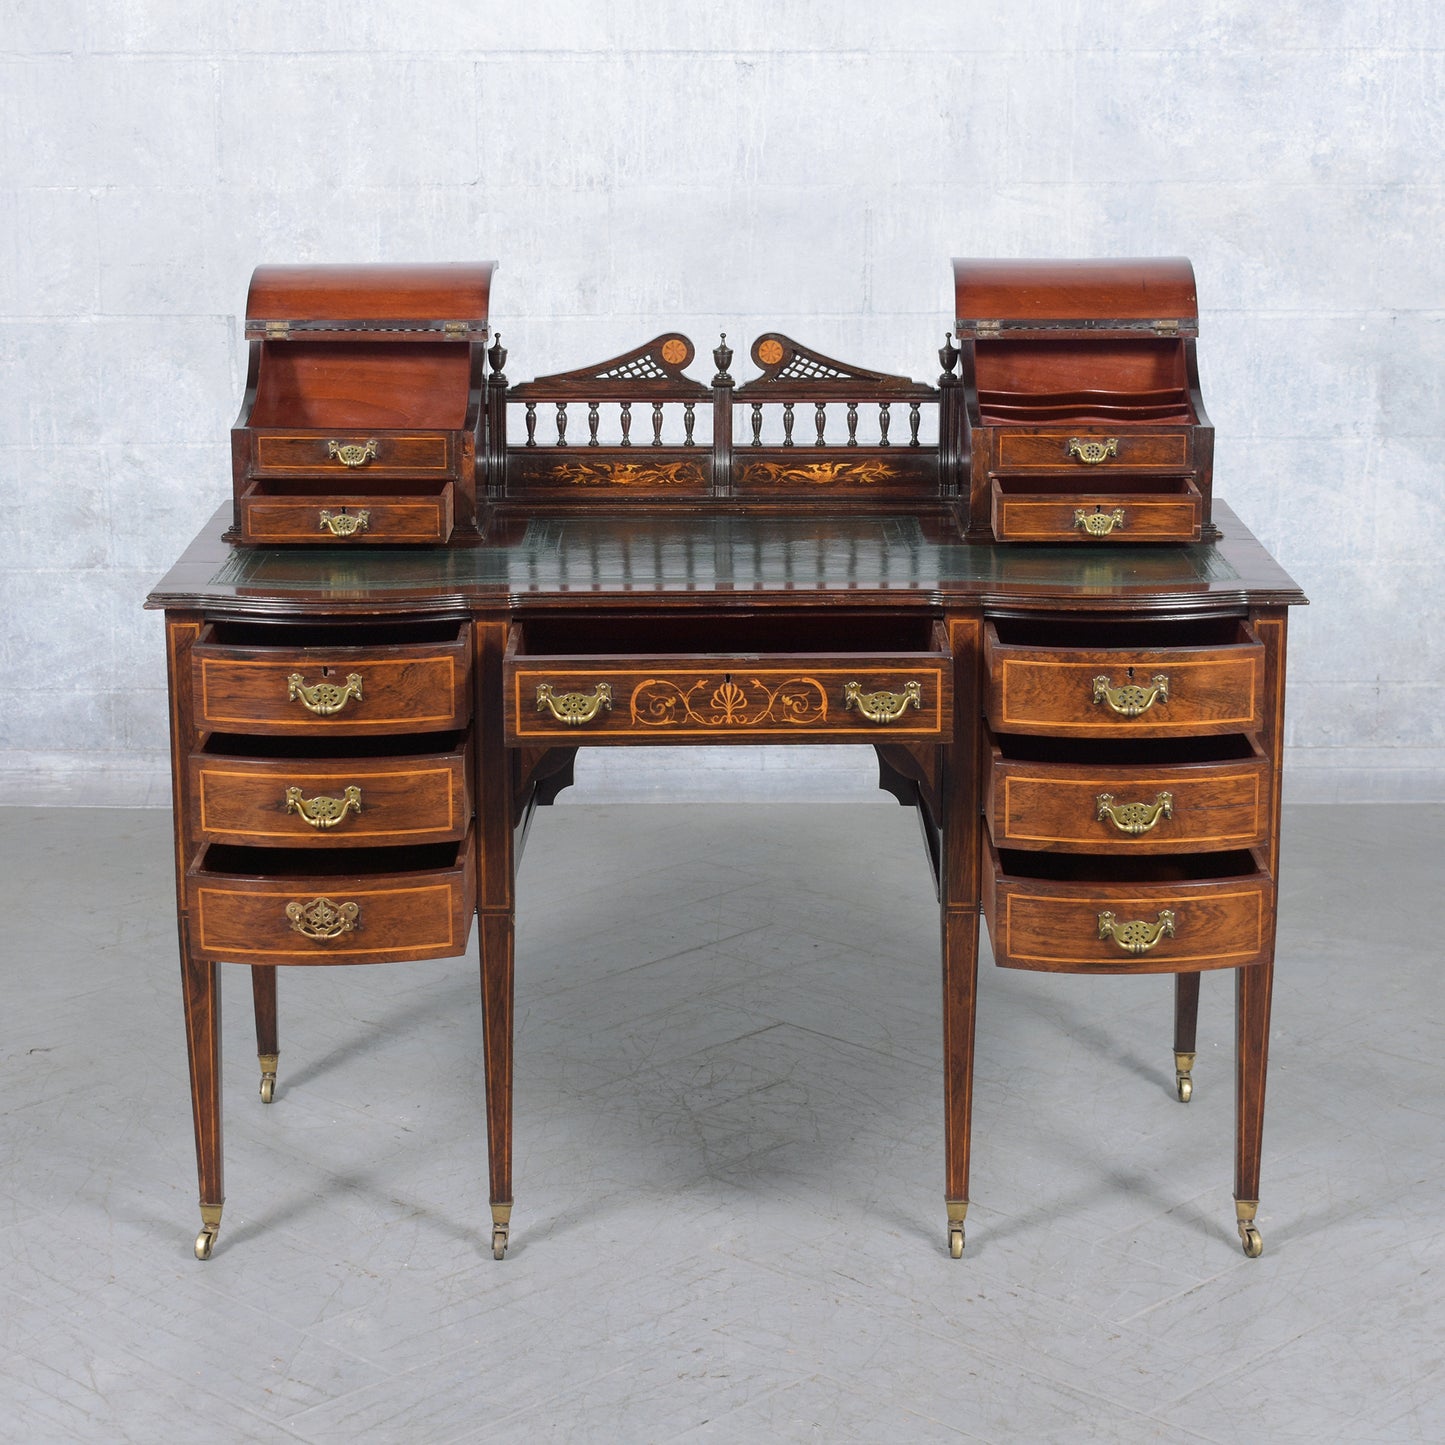 1890s Antique English Carlton Writing Desk with Mahogany and Inlay Veneers